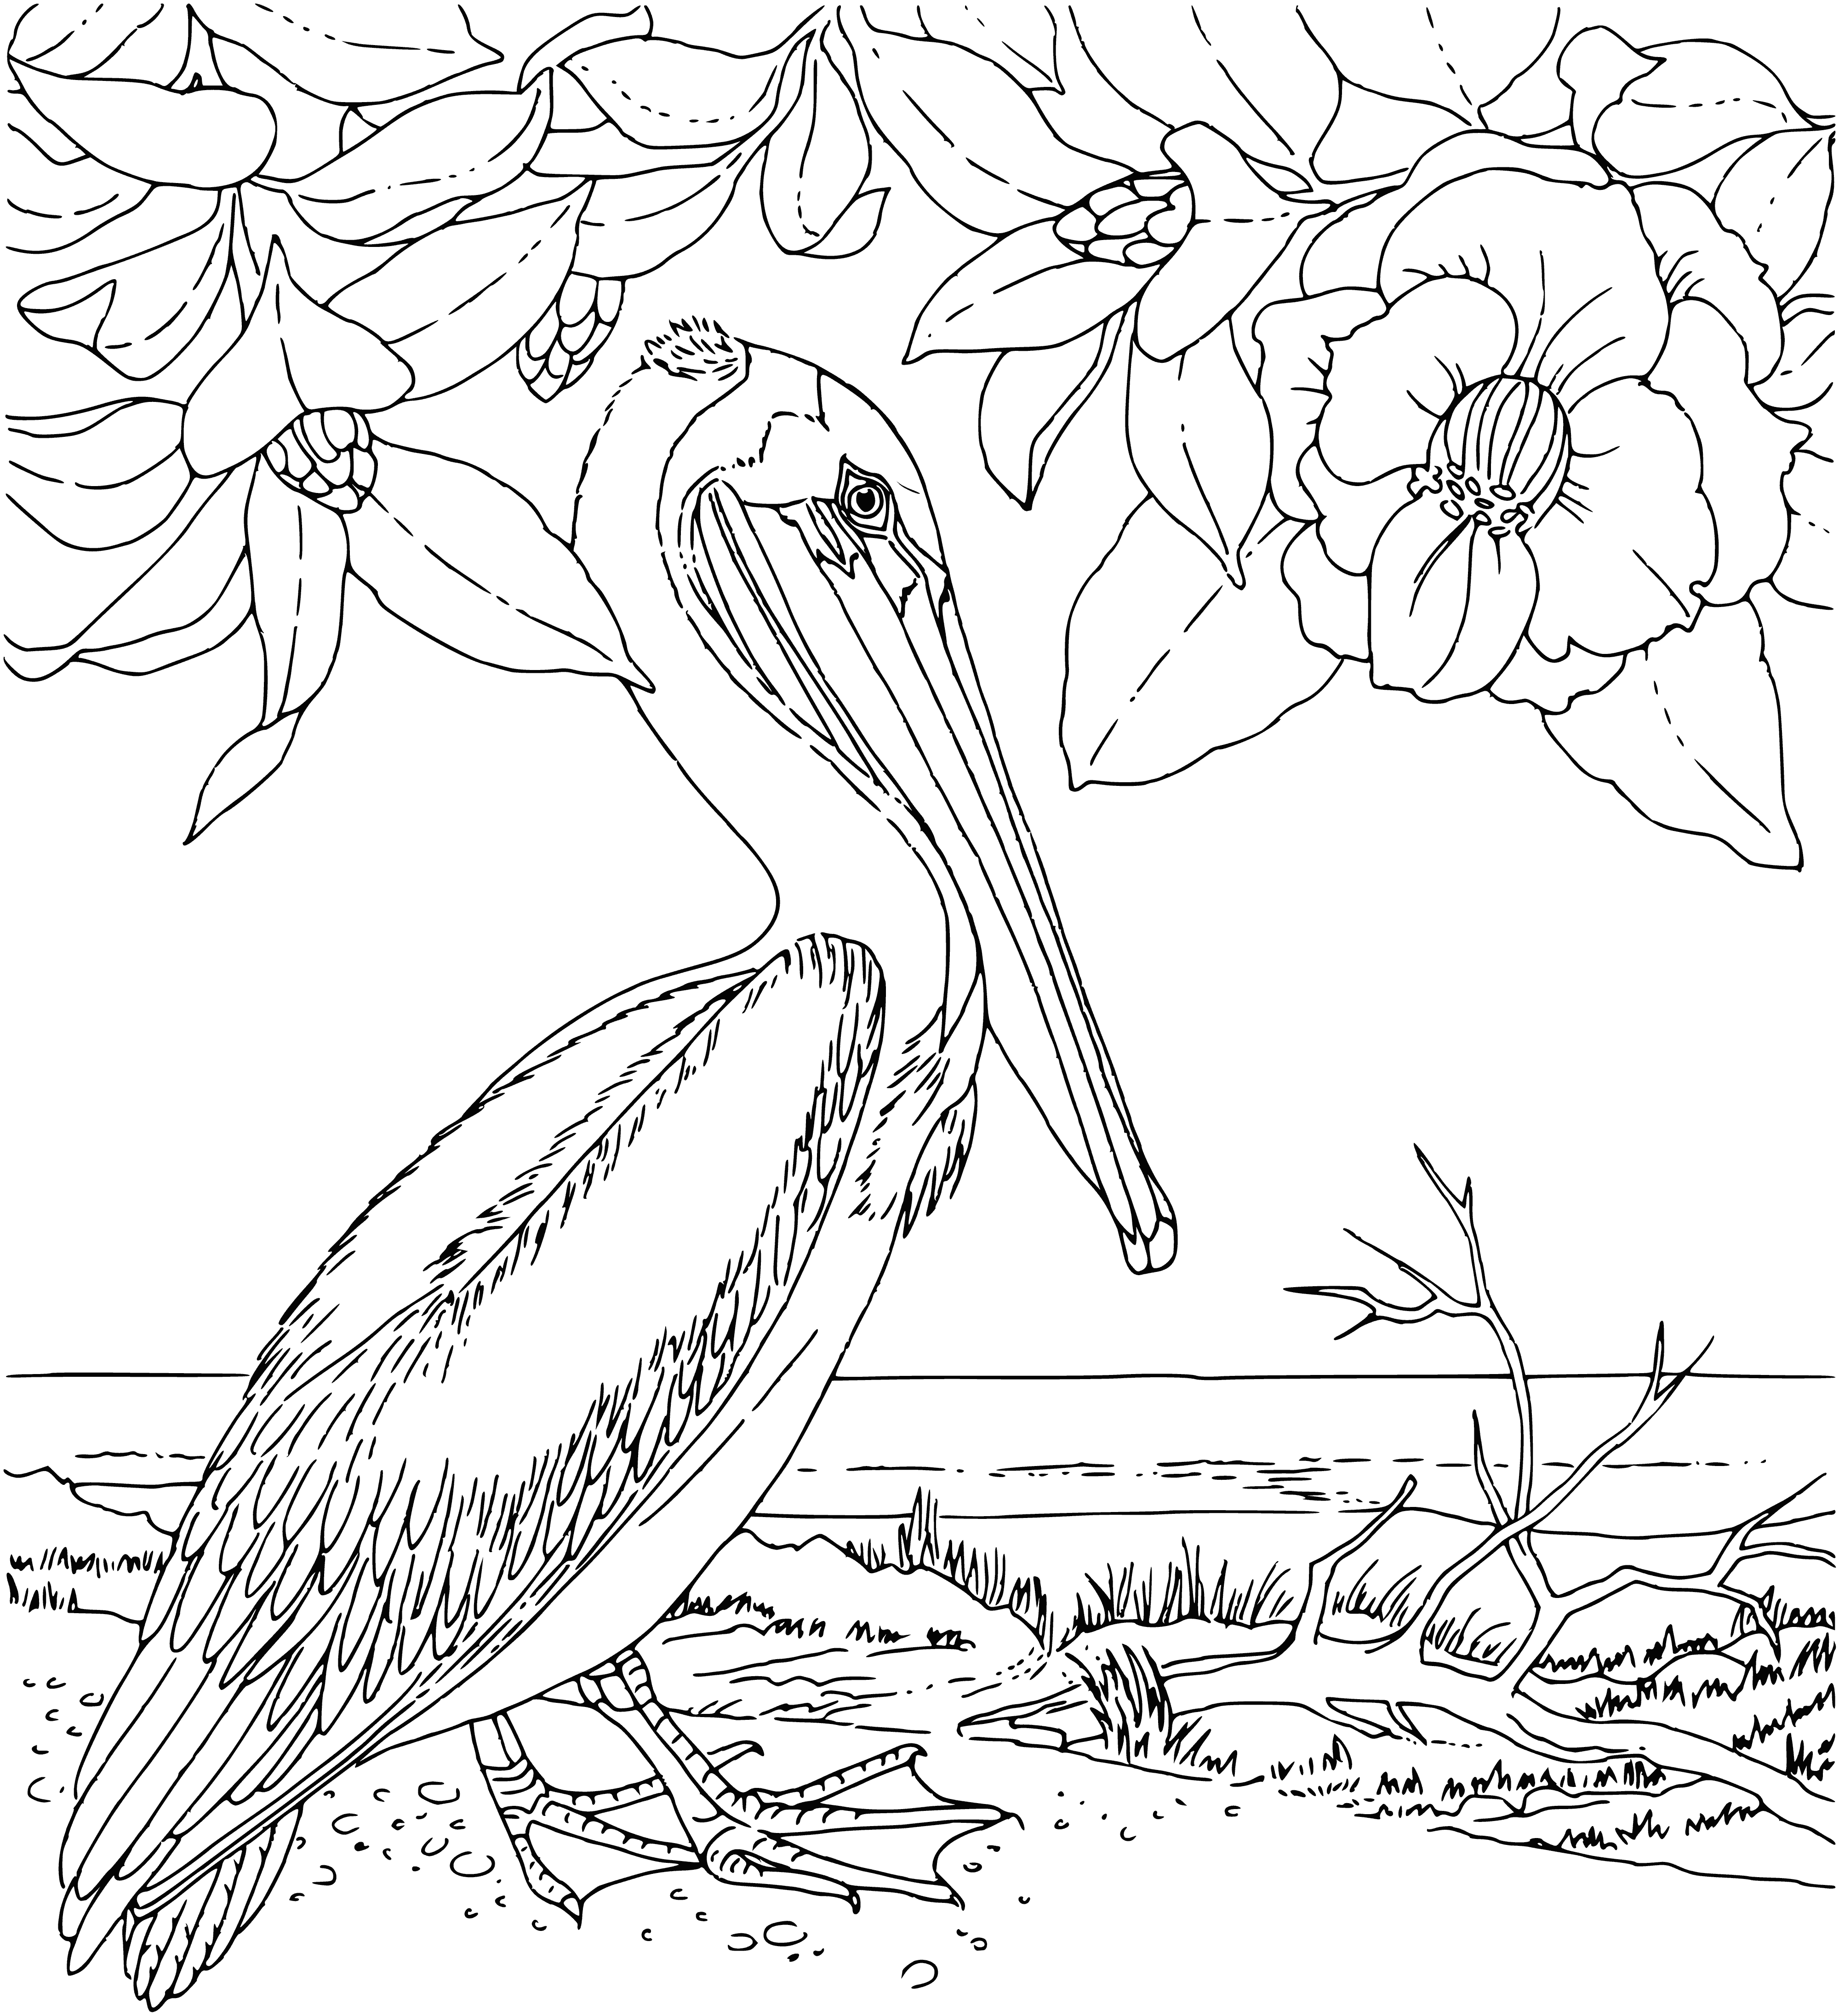 coloring page: Large white bird with black-tipped wings stands on a rock in the water. Long neck, bill, and webbed feet.